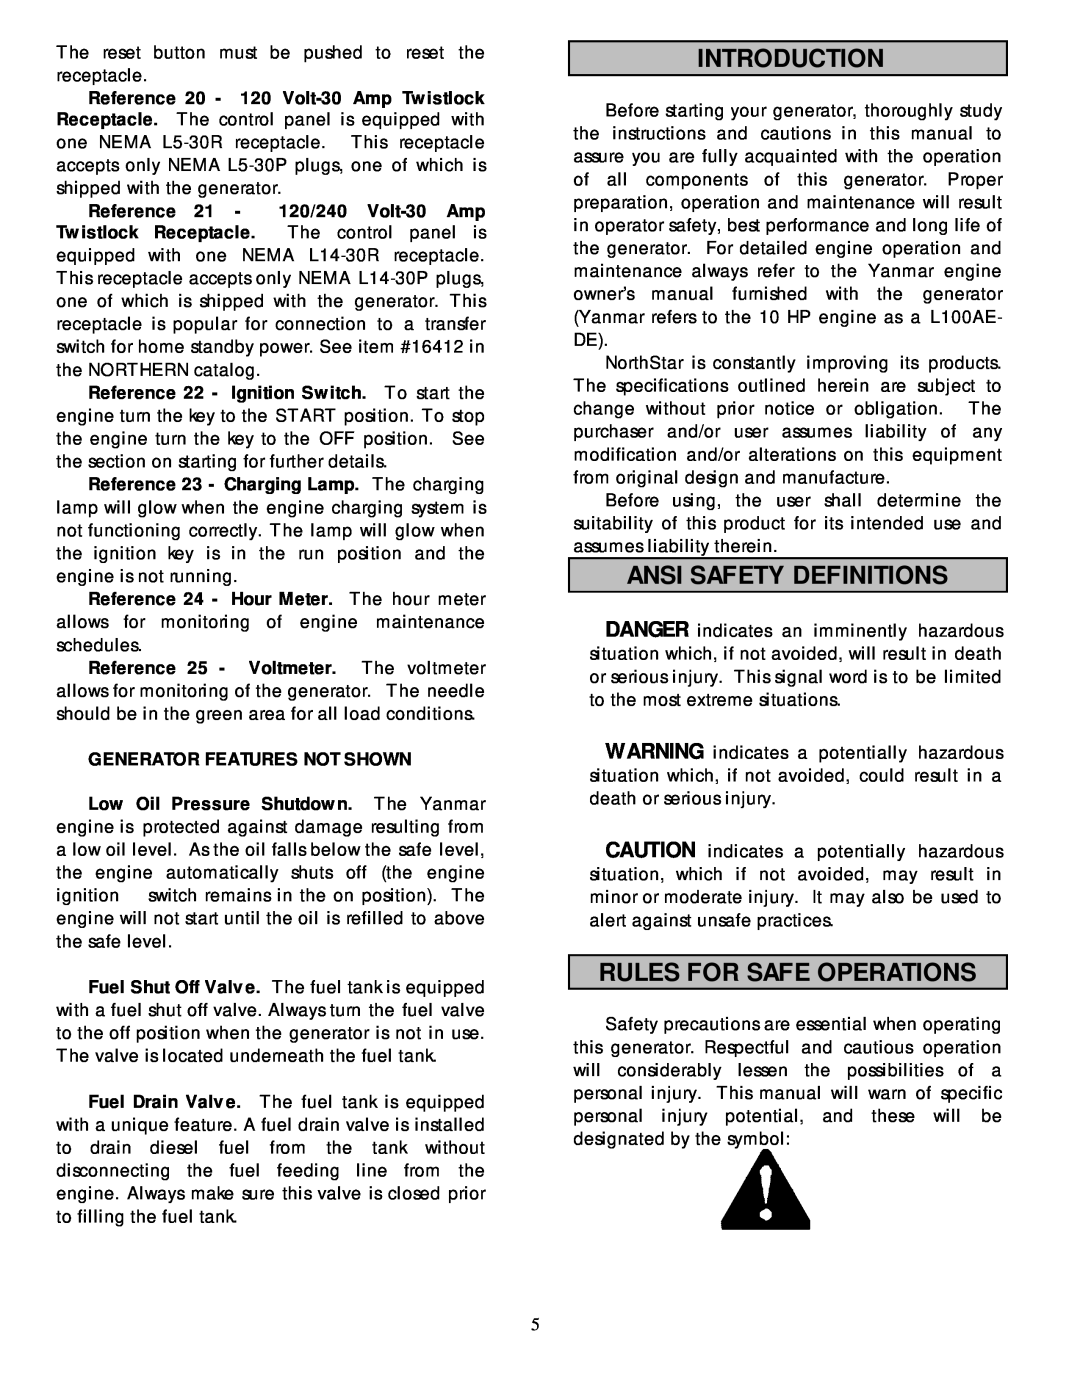 North Star 6500 DPG owner manual Introduction, Ansi Safety Definitions, Rules For Safe Operations 